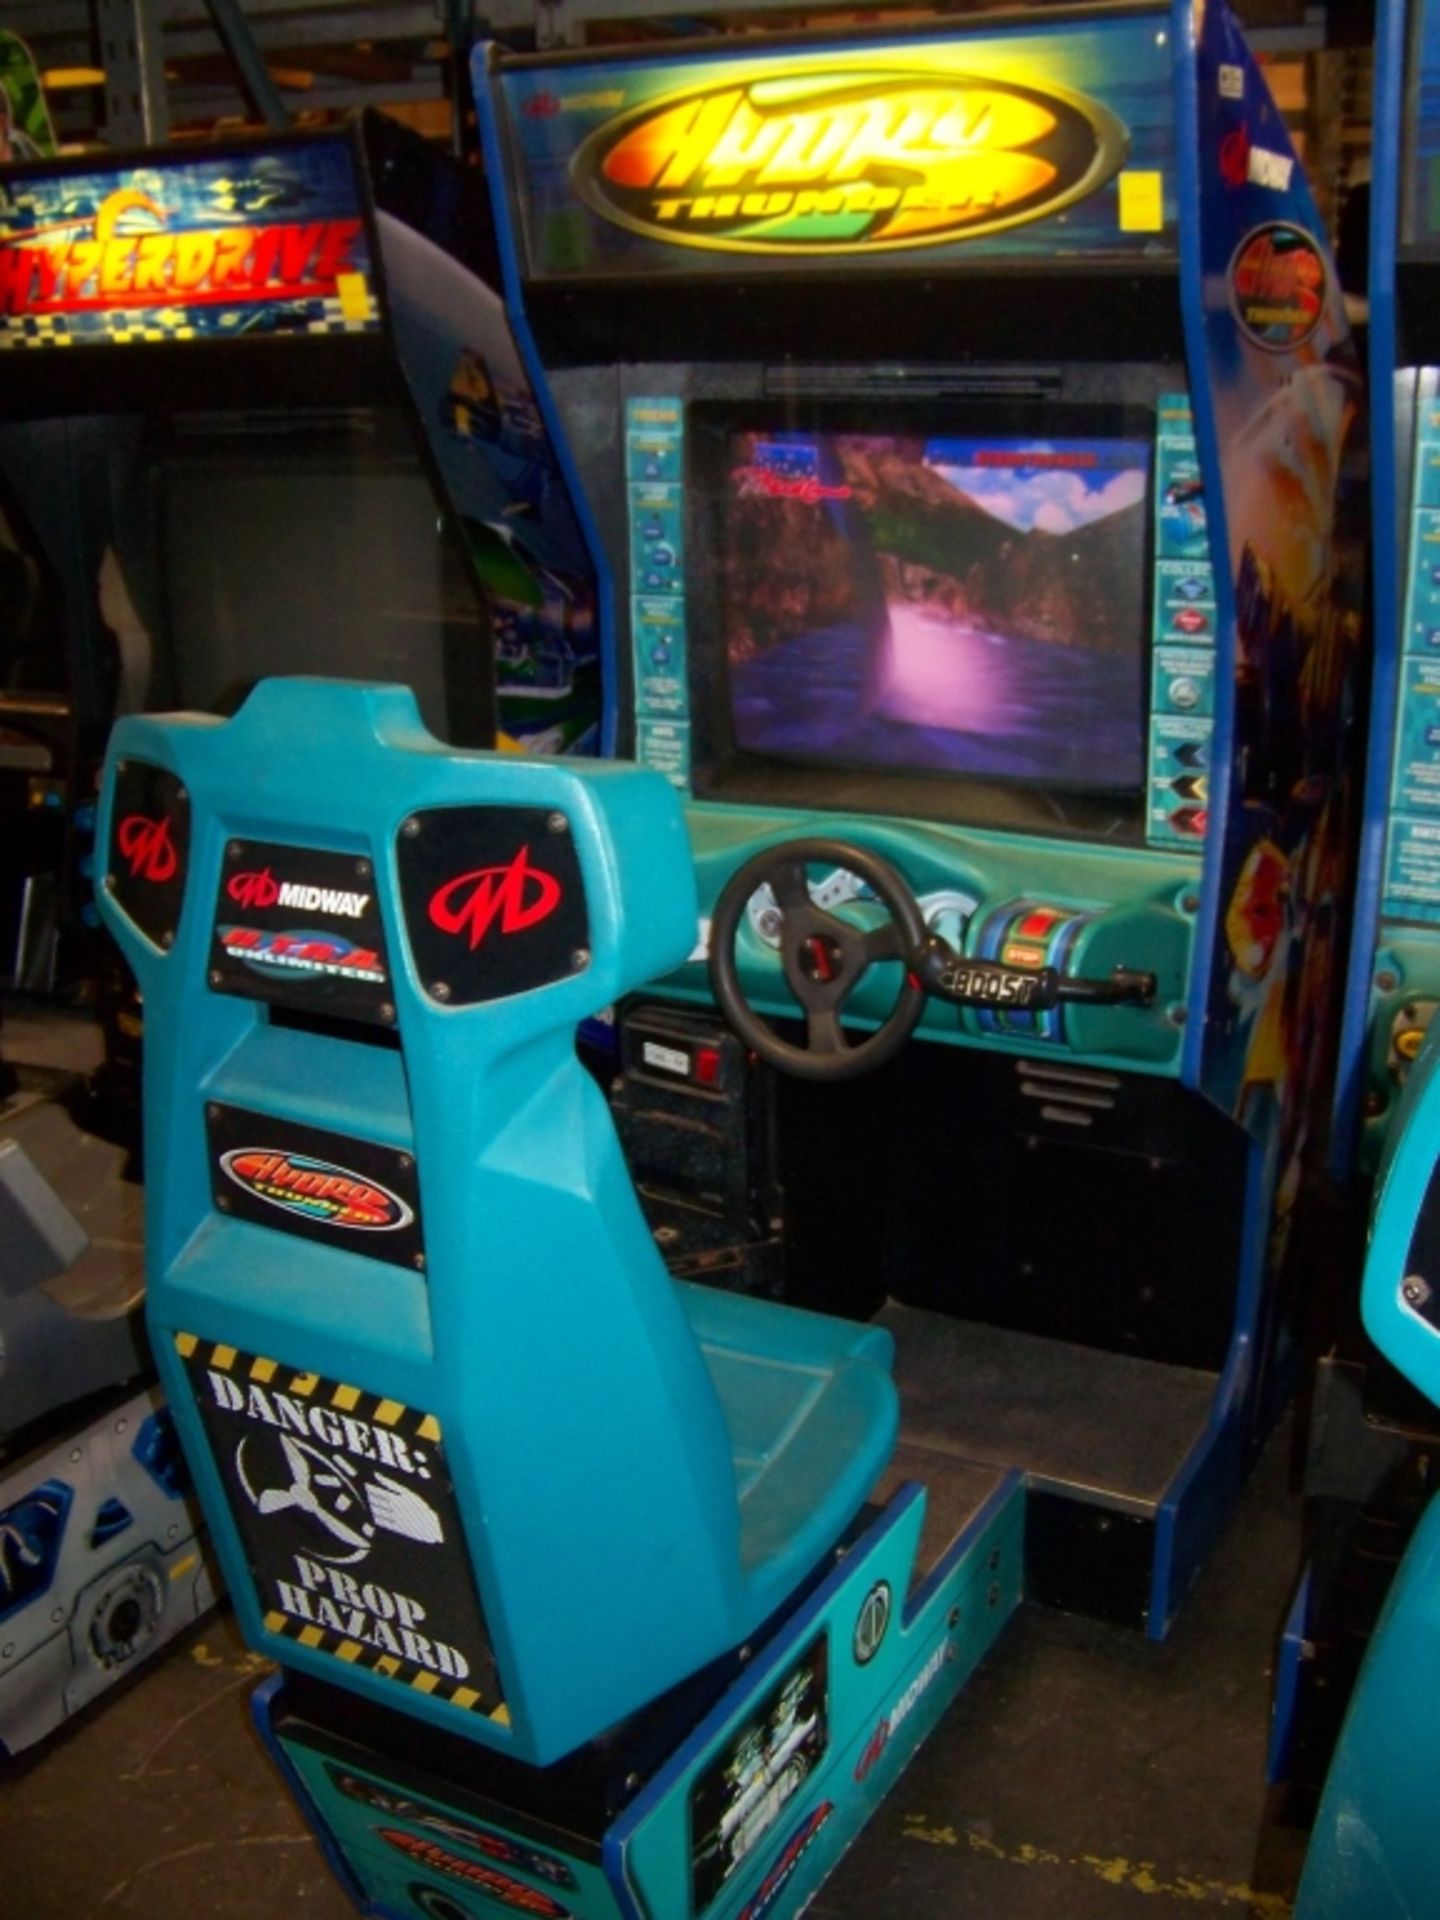 HYDRO THUNDER RACING ARCADE GAME MIDWAY - Image 3 of 3